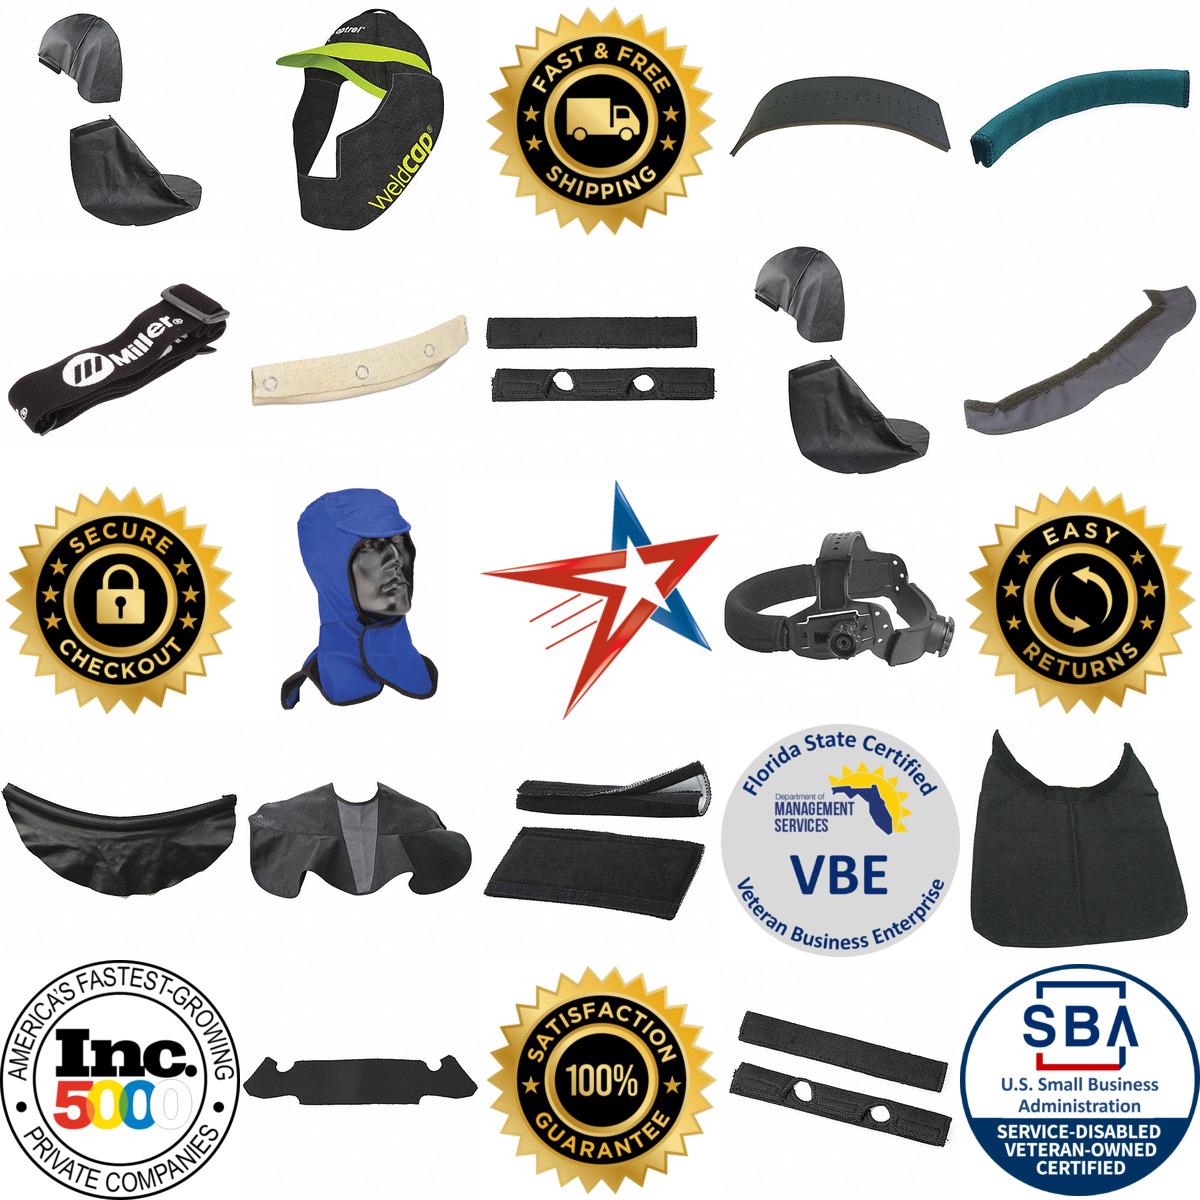 A selection of Welding Helmet Sweatbands and Body Protectors products on GoVets